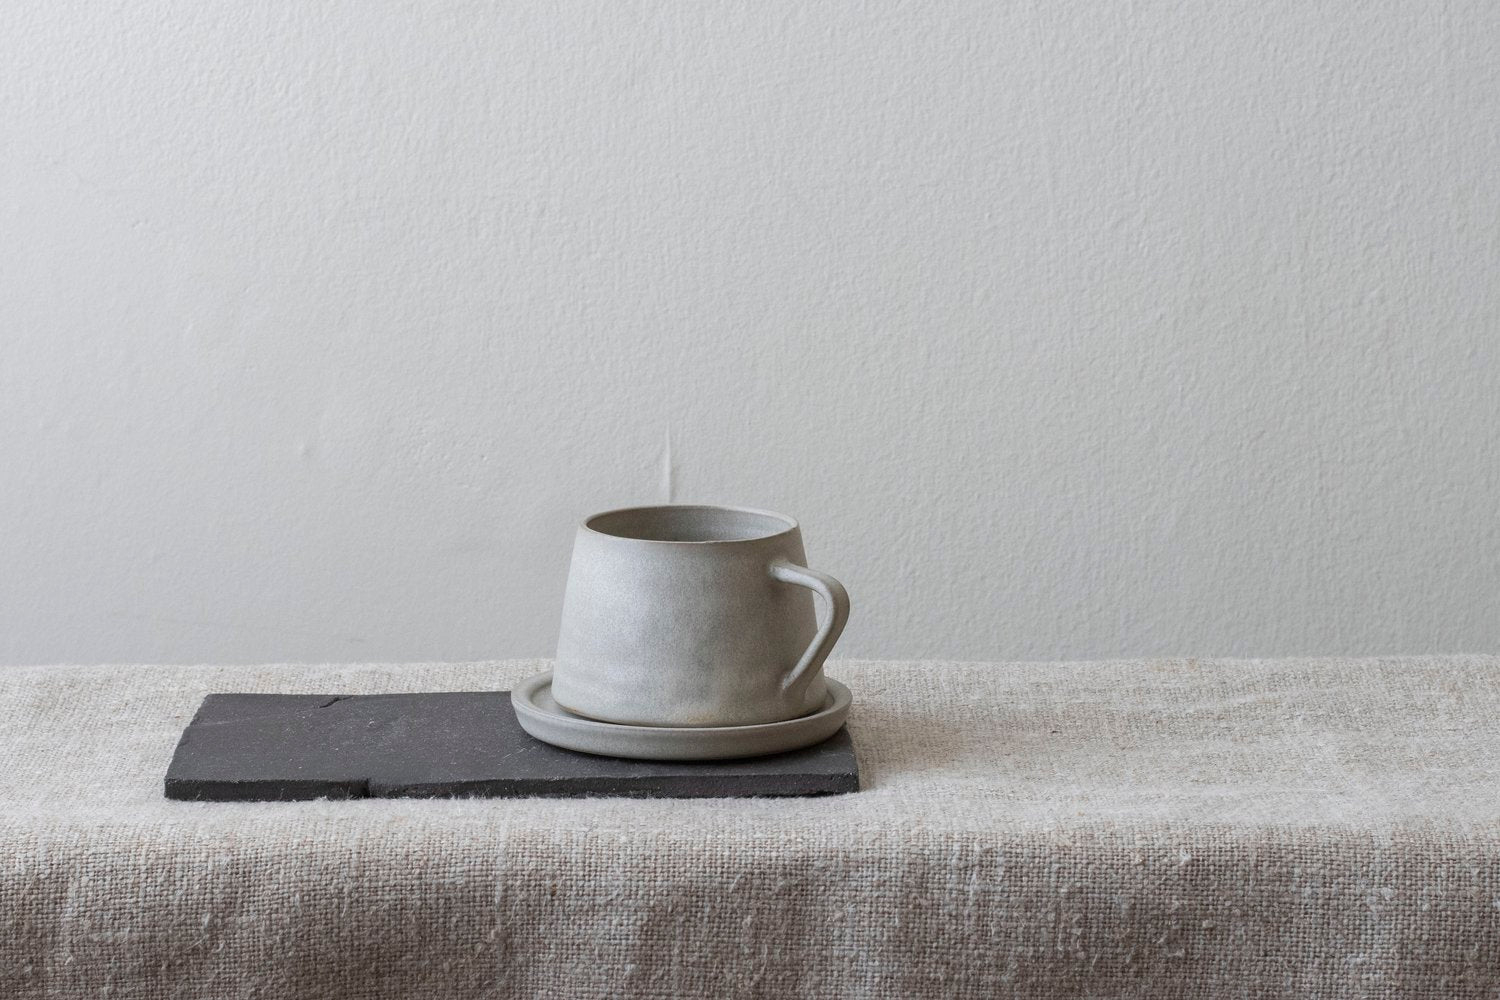 A hand thrown cup and saucer by Borja Moronta available at Lifestory